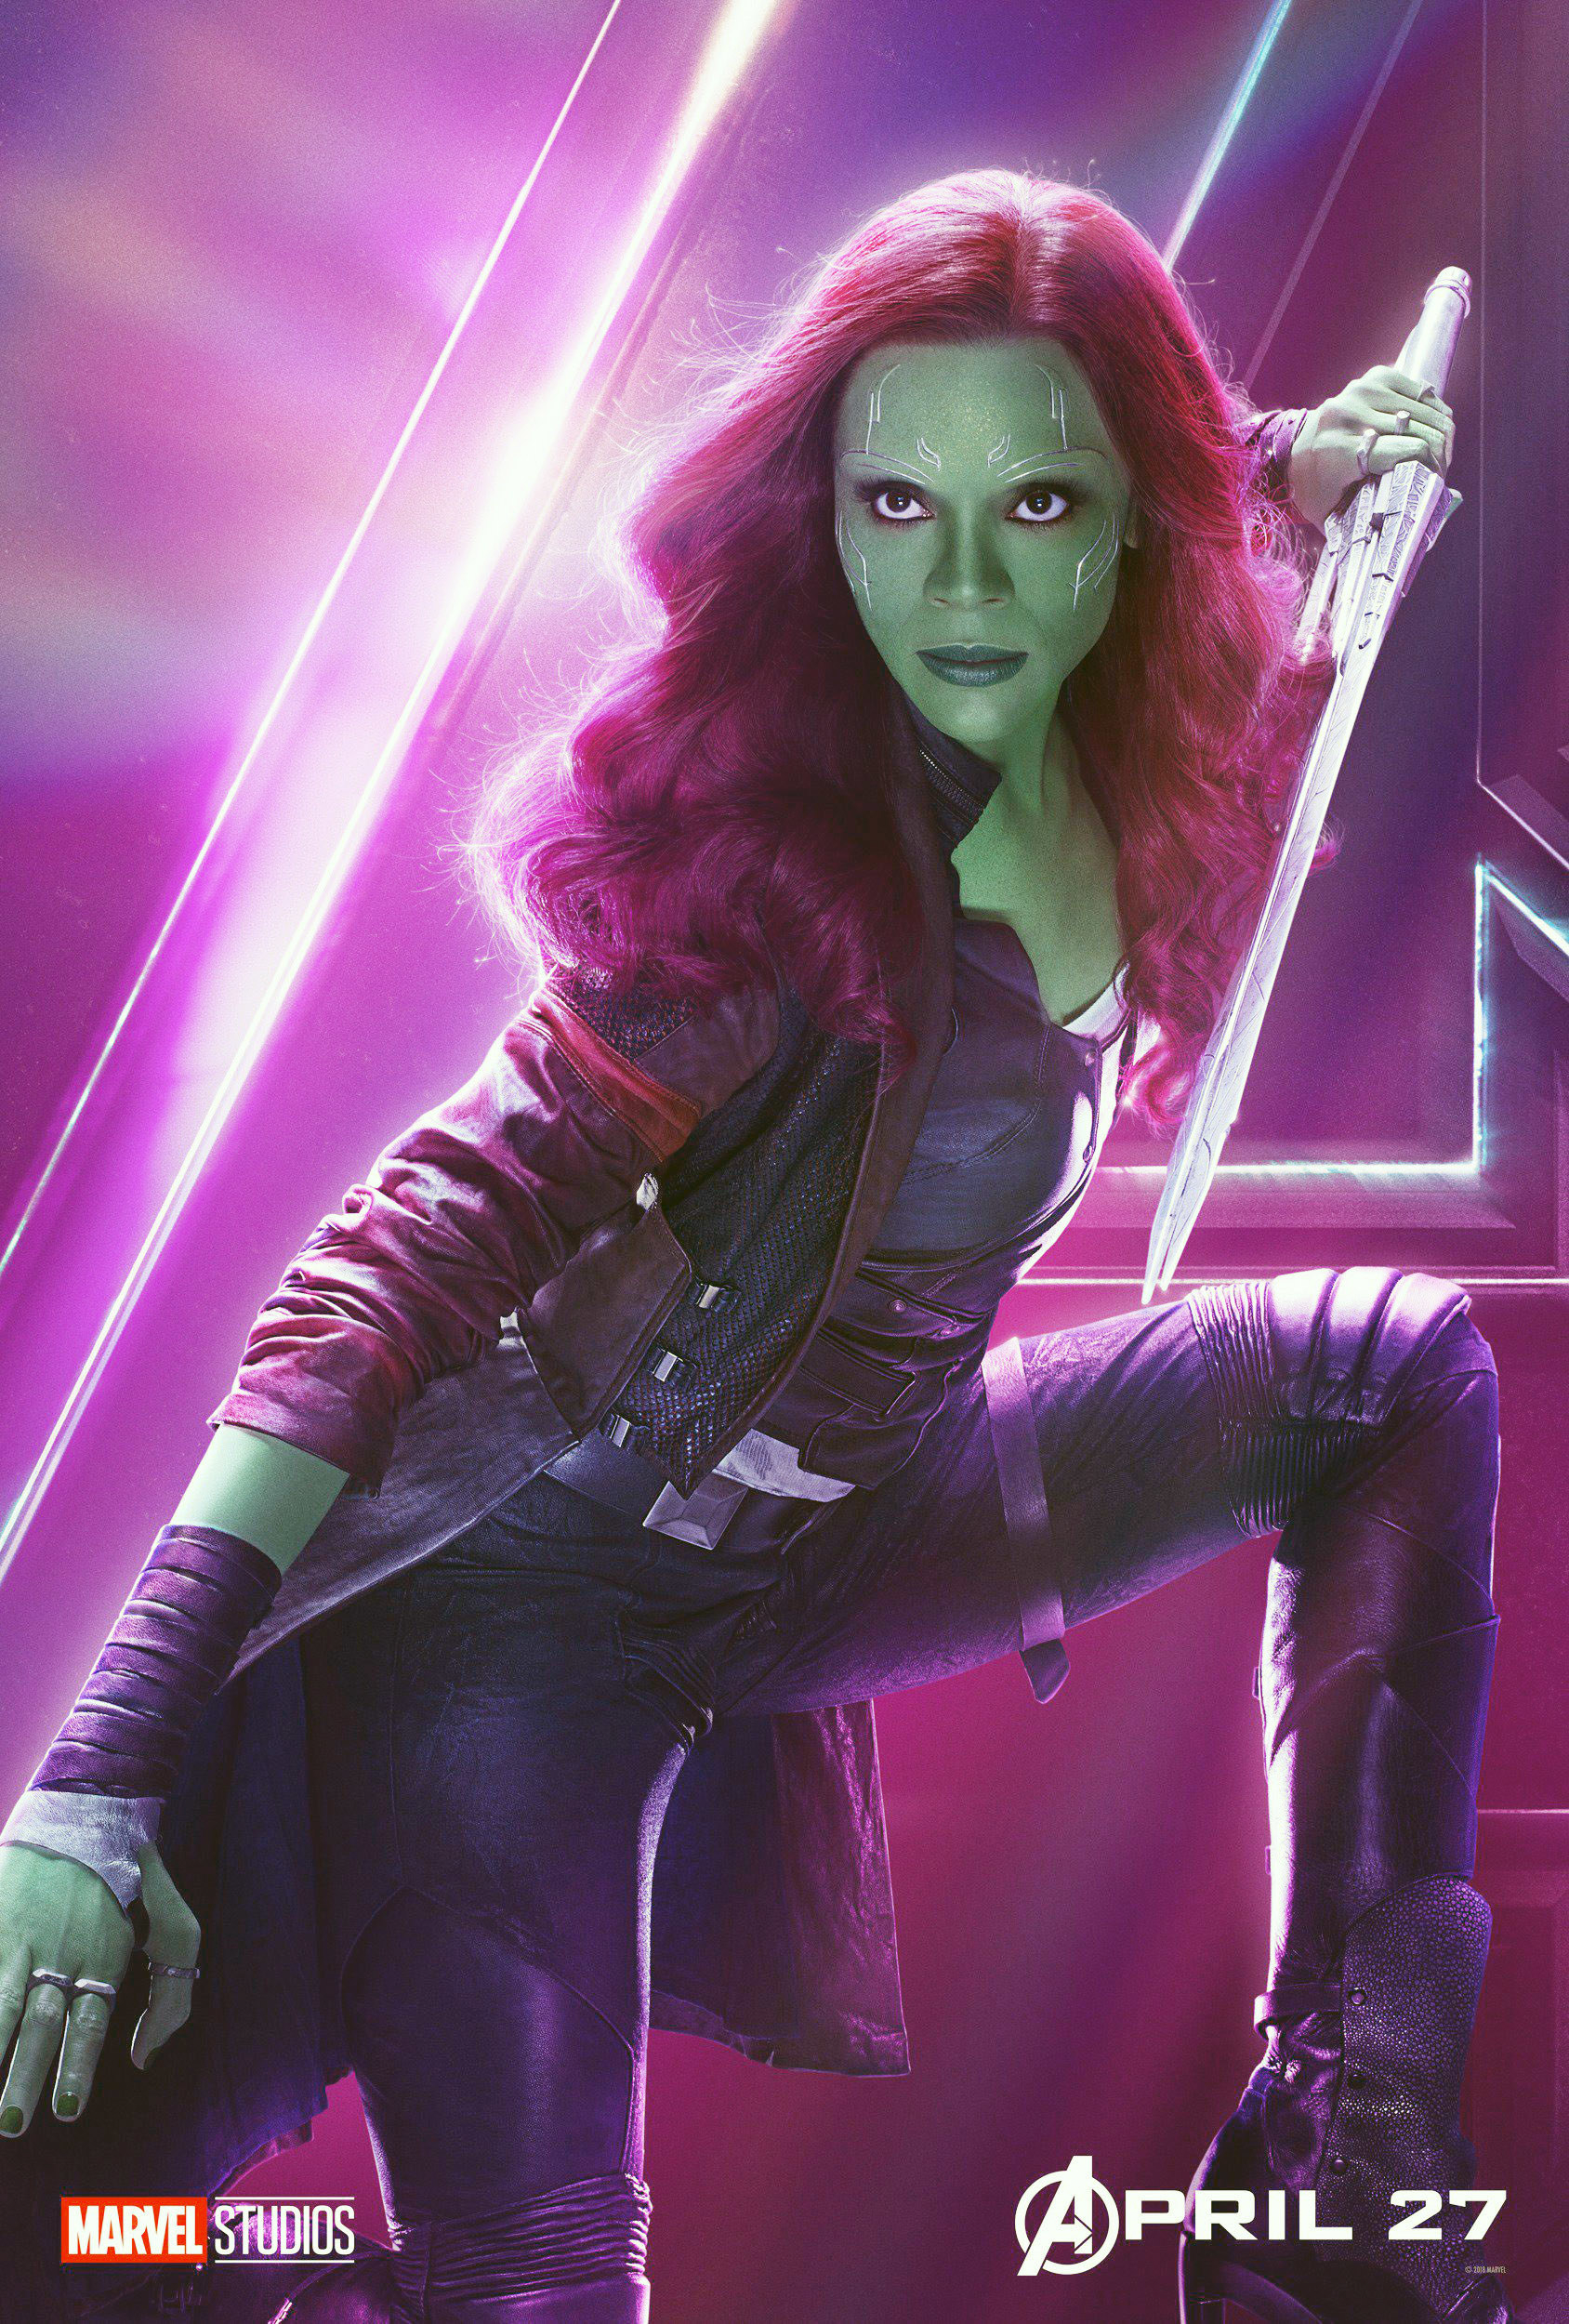 Gamora wearing her outfit on an Infinity War poster